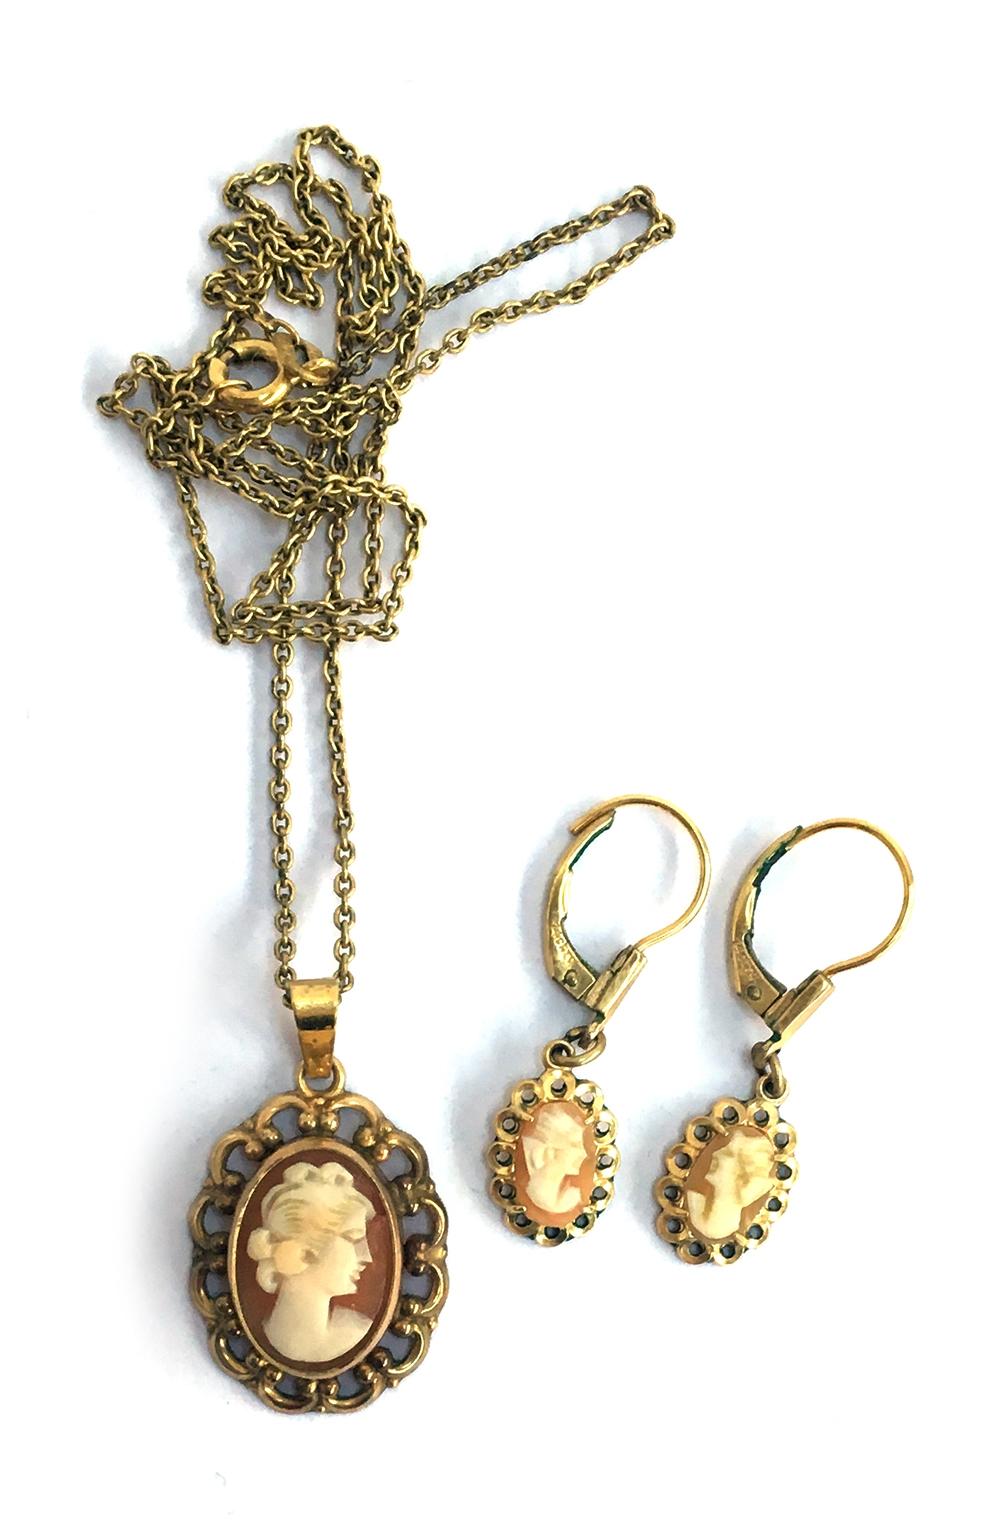 14ct rolled gold cameo pendant on chain together with 14ct rolled gold cameo earrings, gross